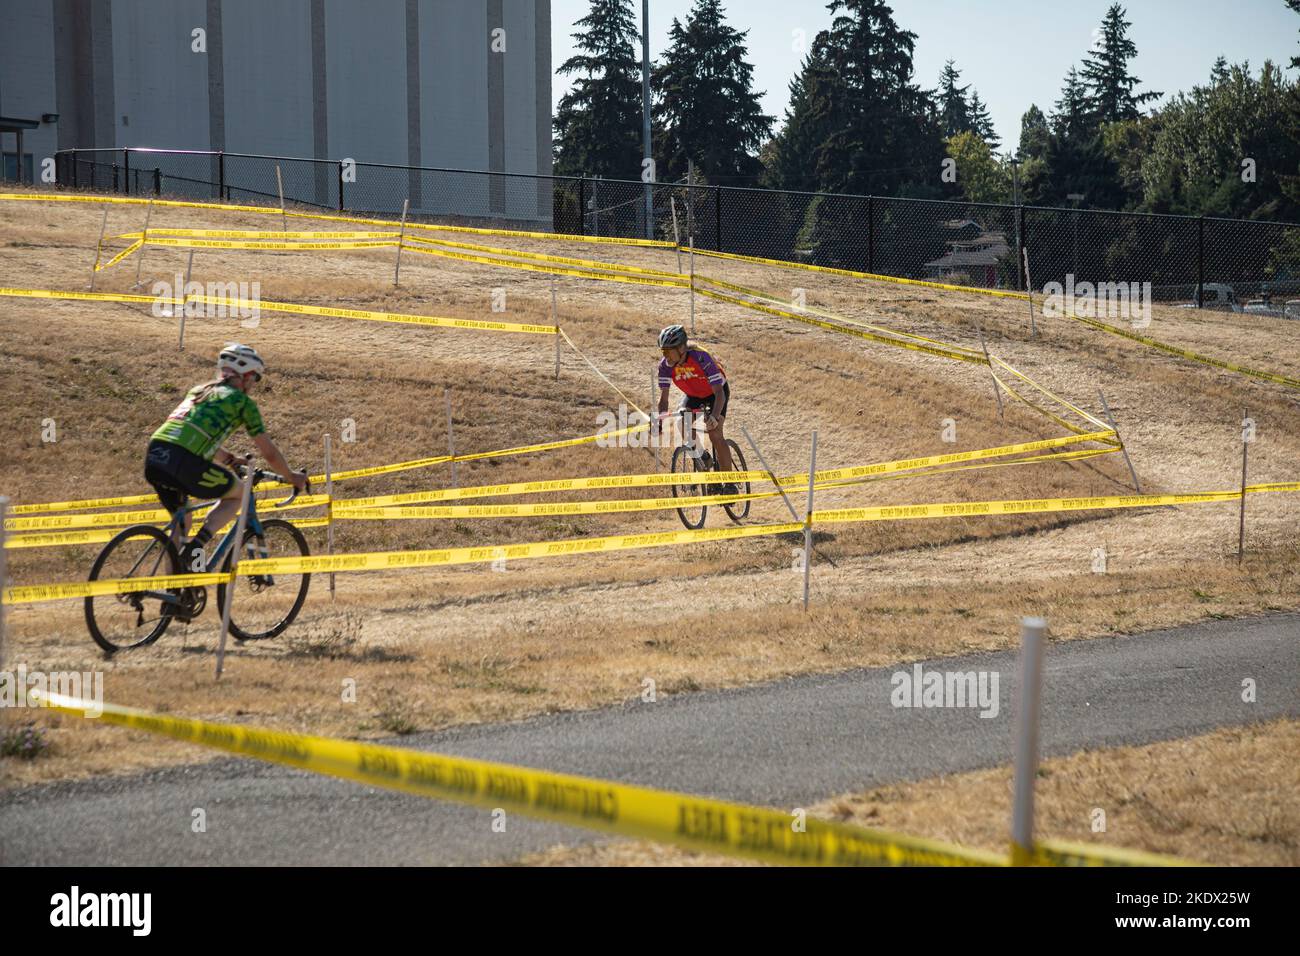 WA22610-00...WASHINGTON - Tom Kirkendall coming out of a series of curves while another rider enters in a cyclocross race  at Evergreen High School. Stock Photo